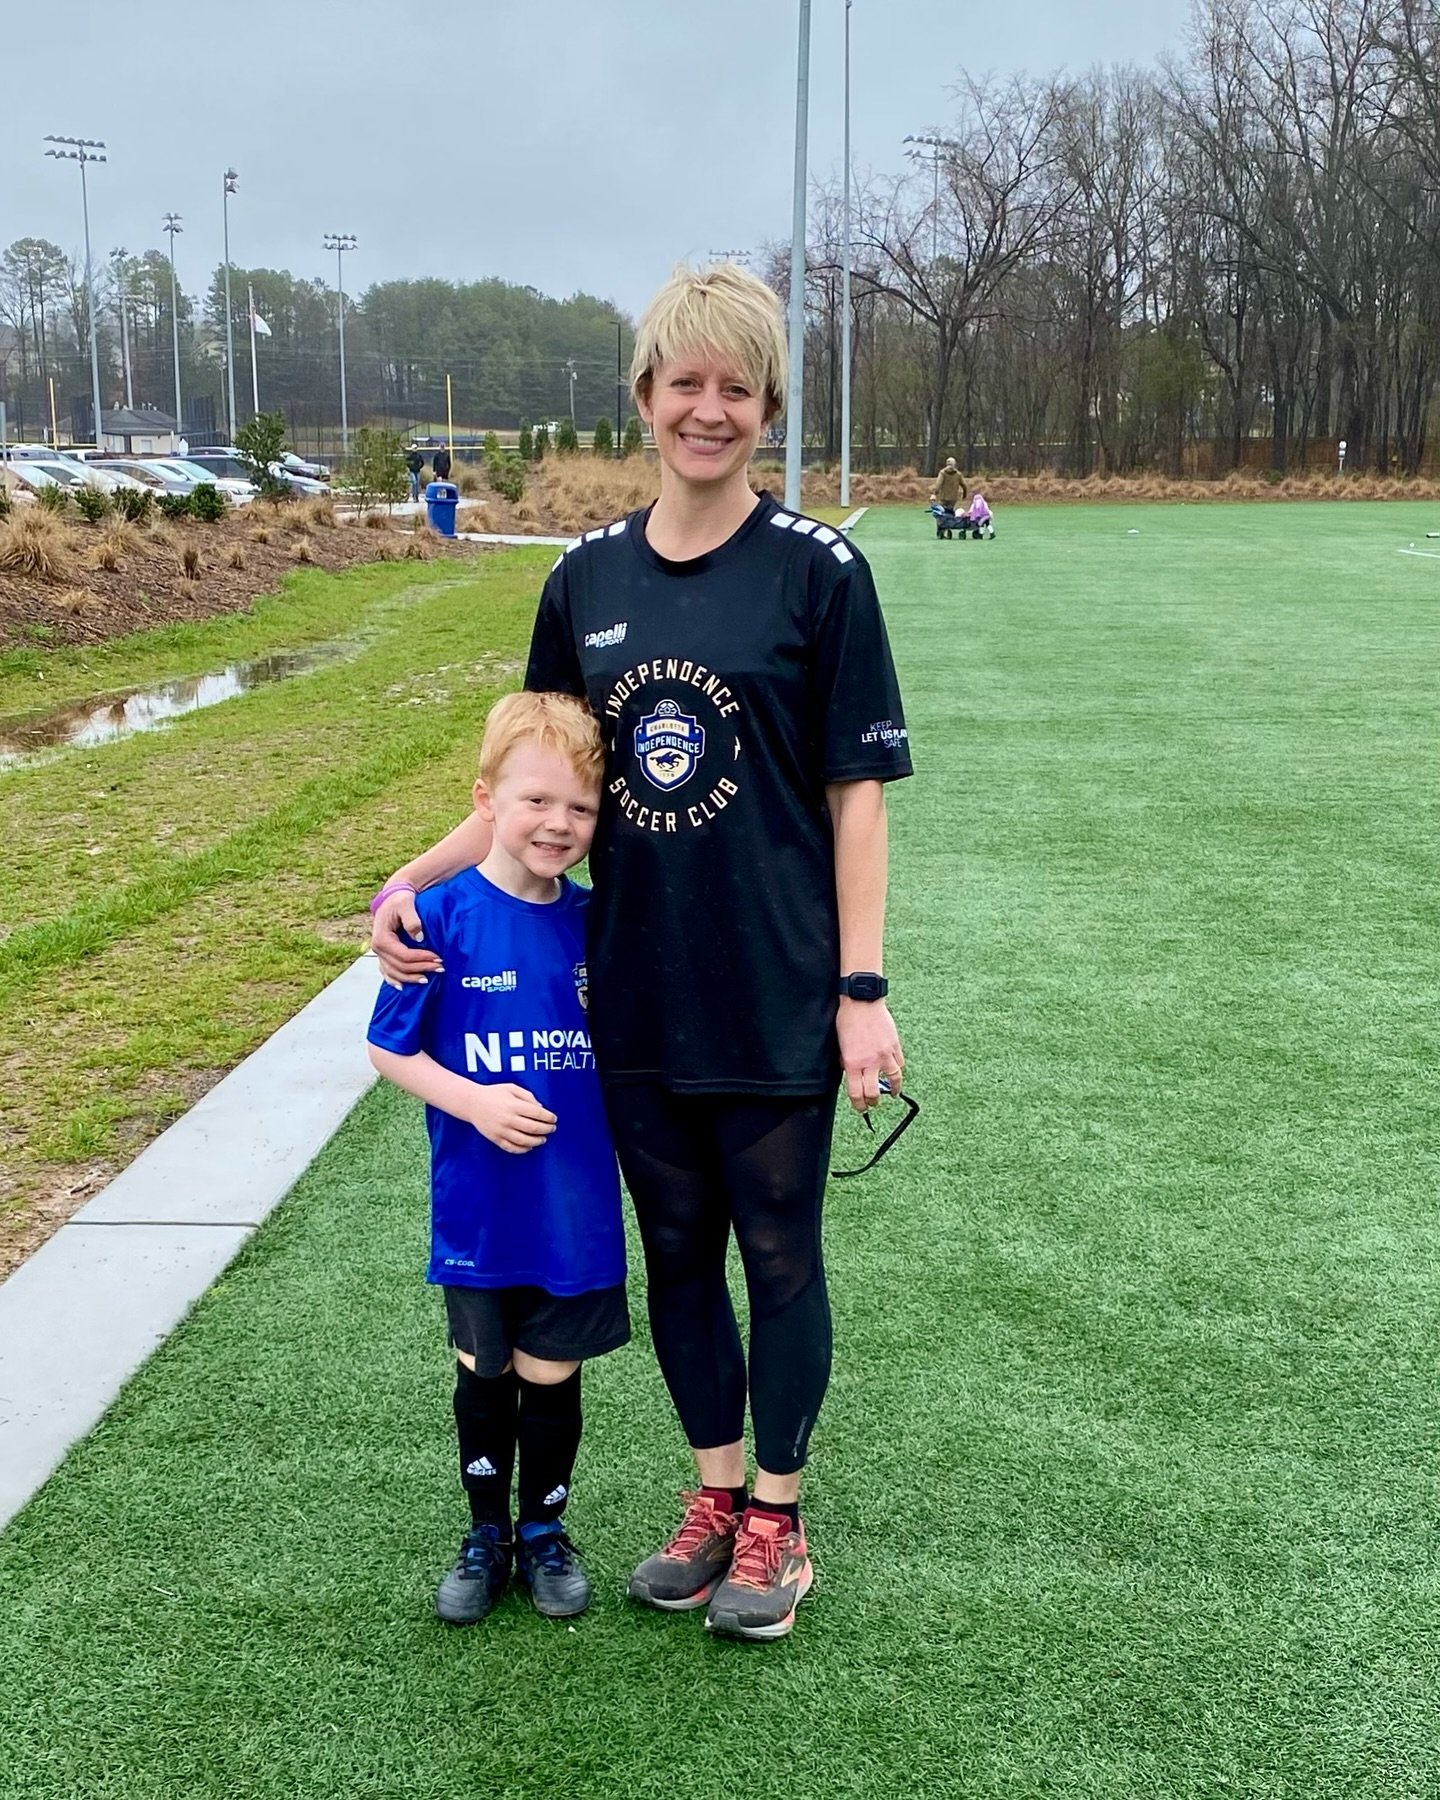 @laurakingedwards may have retired her own soccer cleats, but she still makes her mark on the field by coaching her son&rsquo;s team.

Shout out to the @independence_sc Tega Cay Galaxy on a great season!

#BlindMomentum #motherrunners #womensrunningc